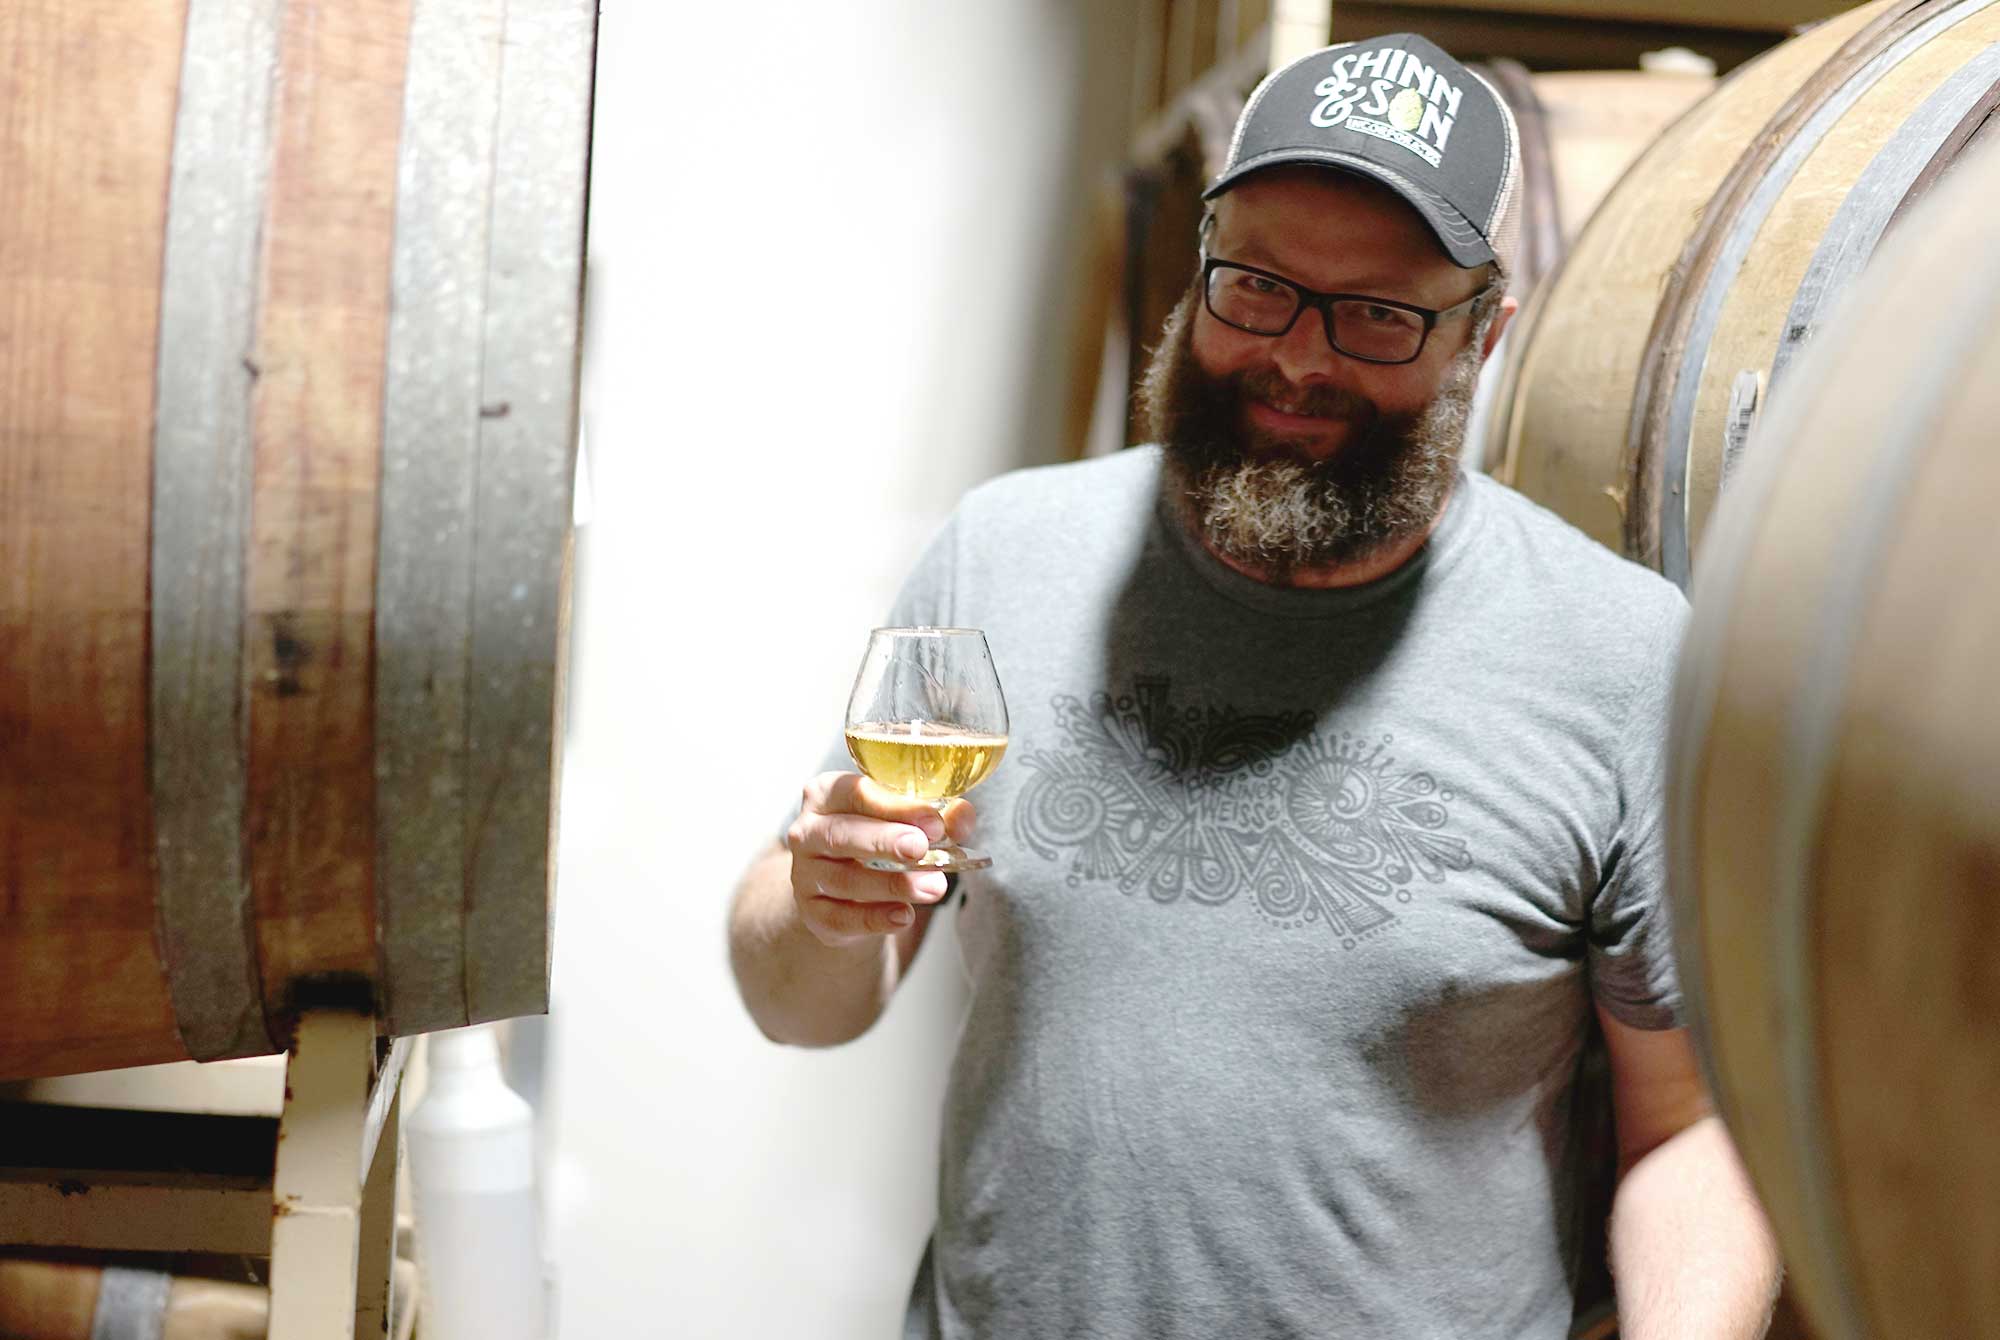 An Interview with Ohio’s King of Barrel-Aging